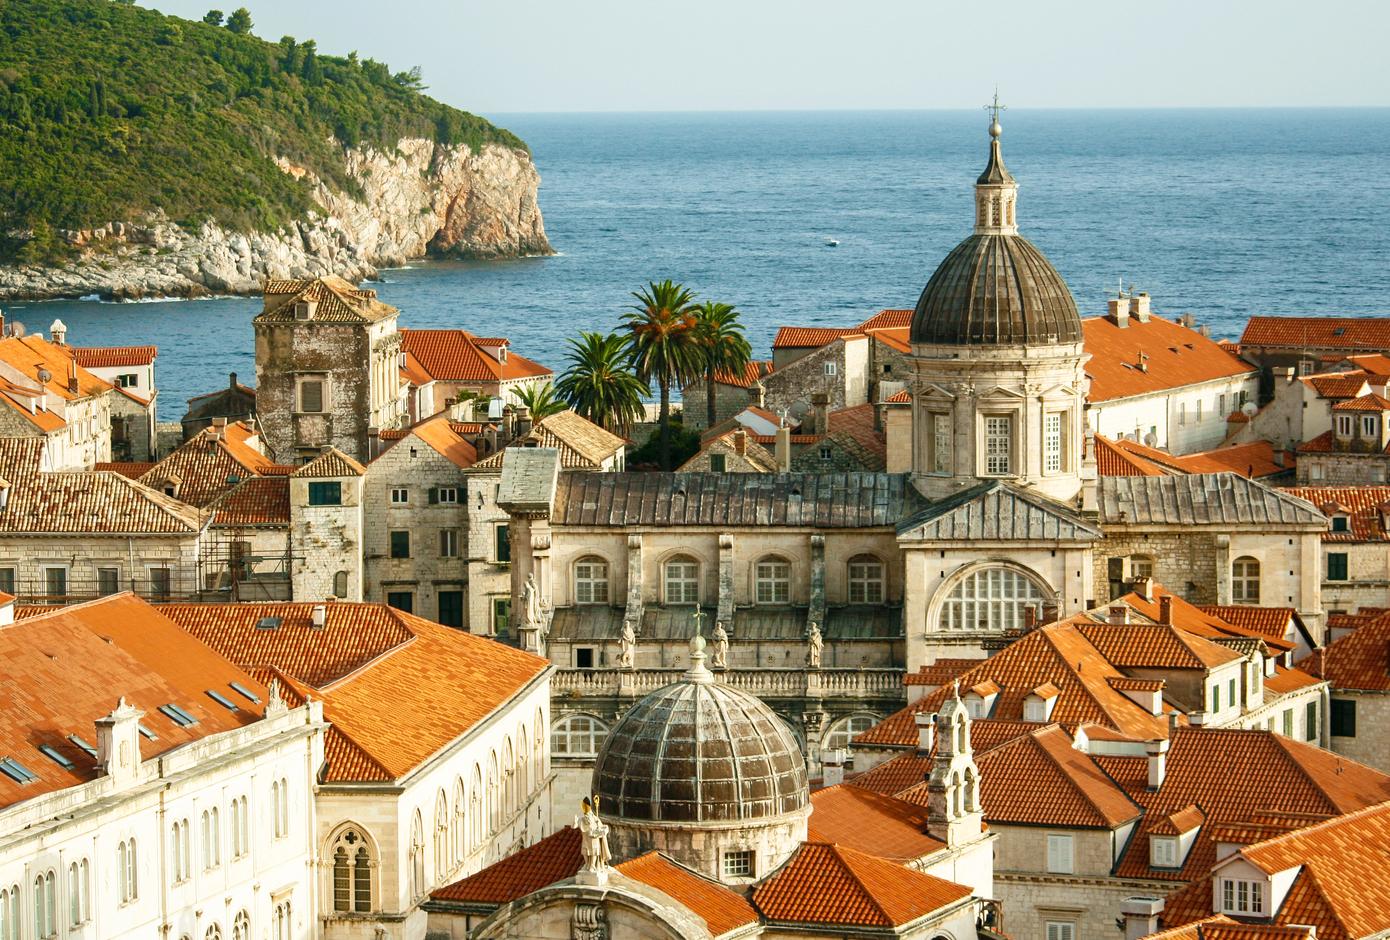 View of Dubrovnik's Old Town with historic buldings, and the Adriatic Sea on the back.